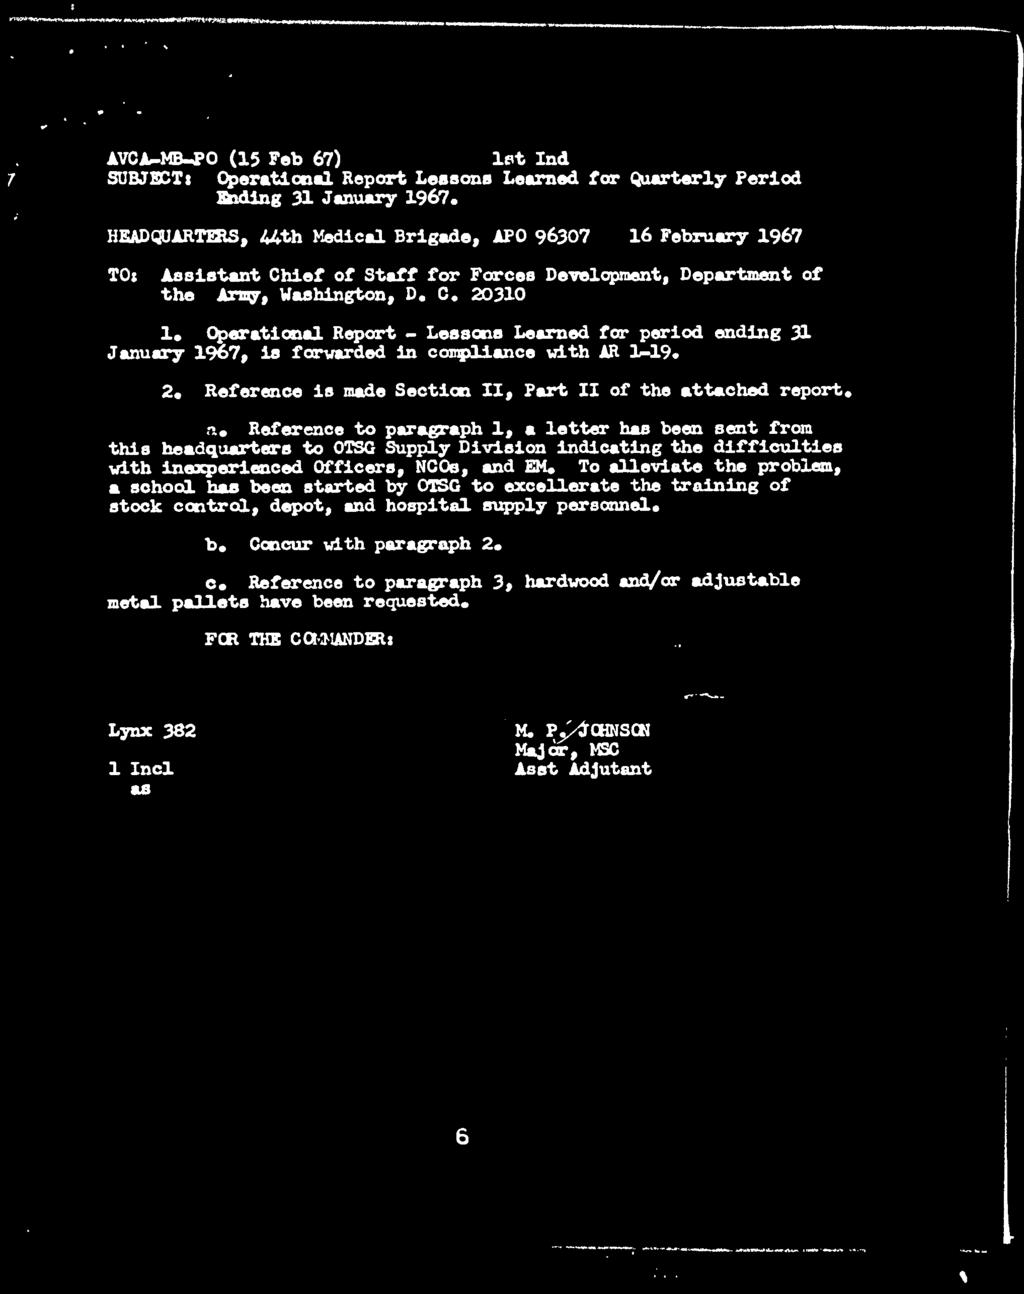 Operational Report - Lessons Learned for period ending 31 January 1967, is forwarded In con^liance with AR 1-19. 2, Reference is made Section II, Fart II of the at